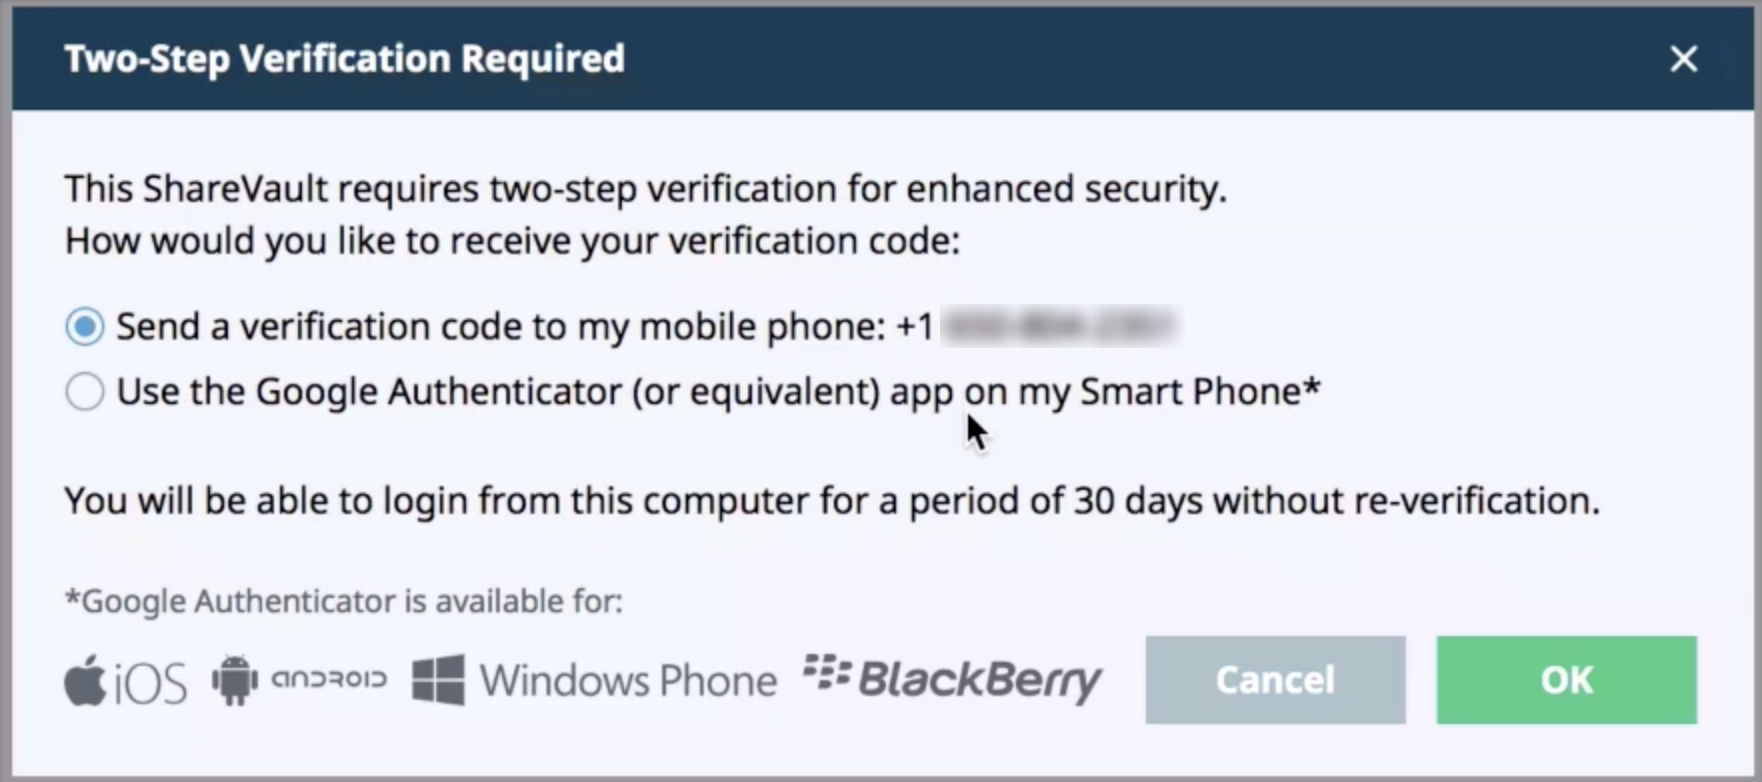 Require Users to Authenticate with a Code